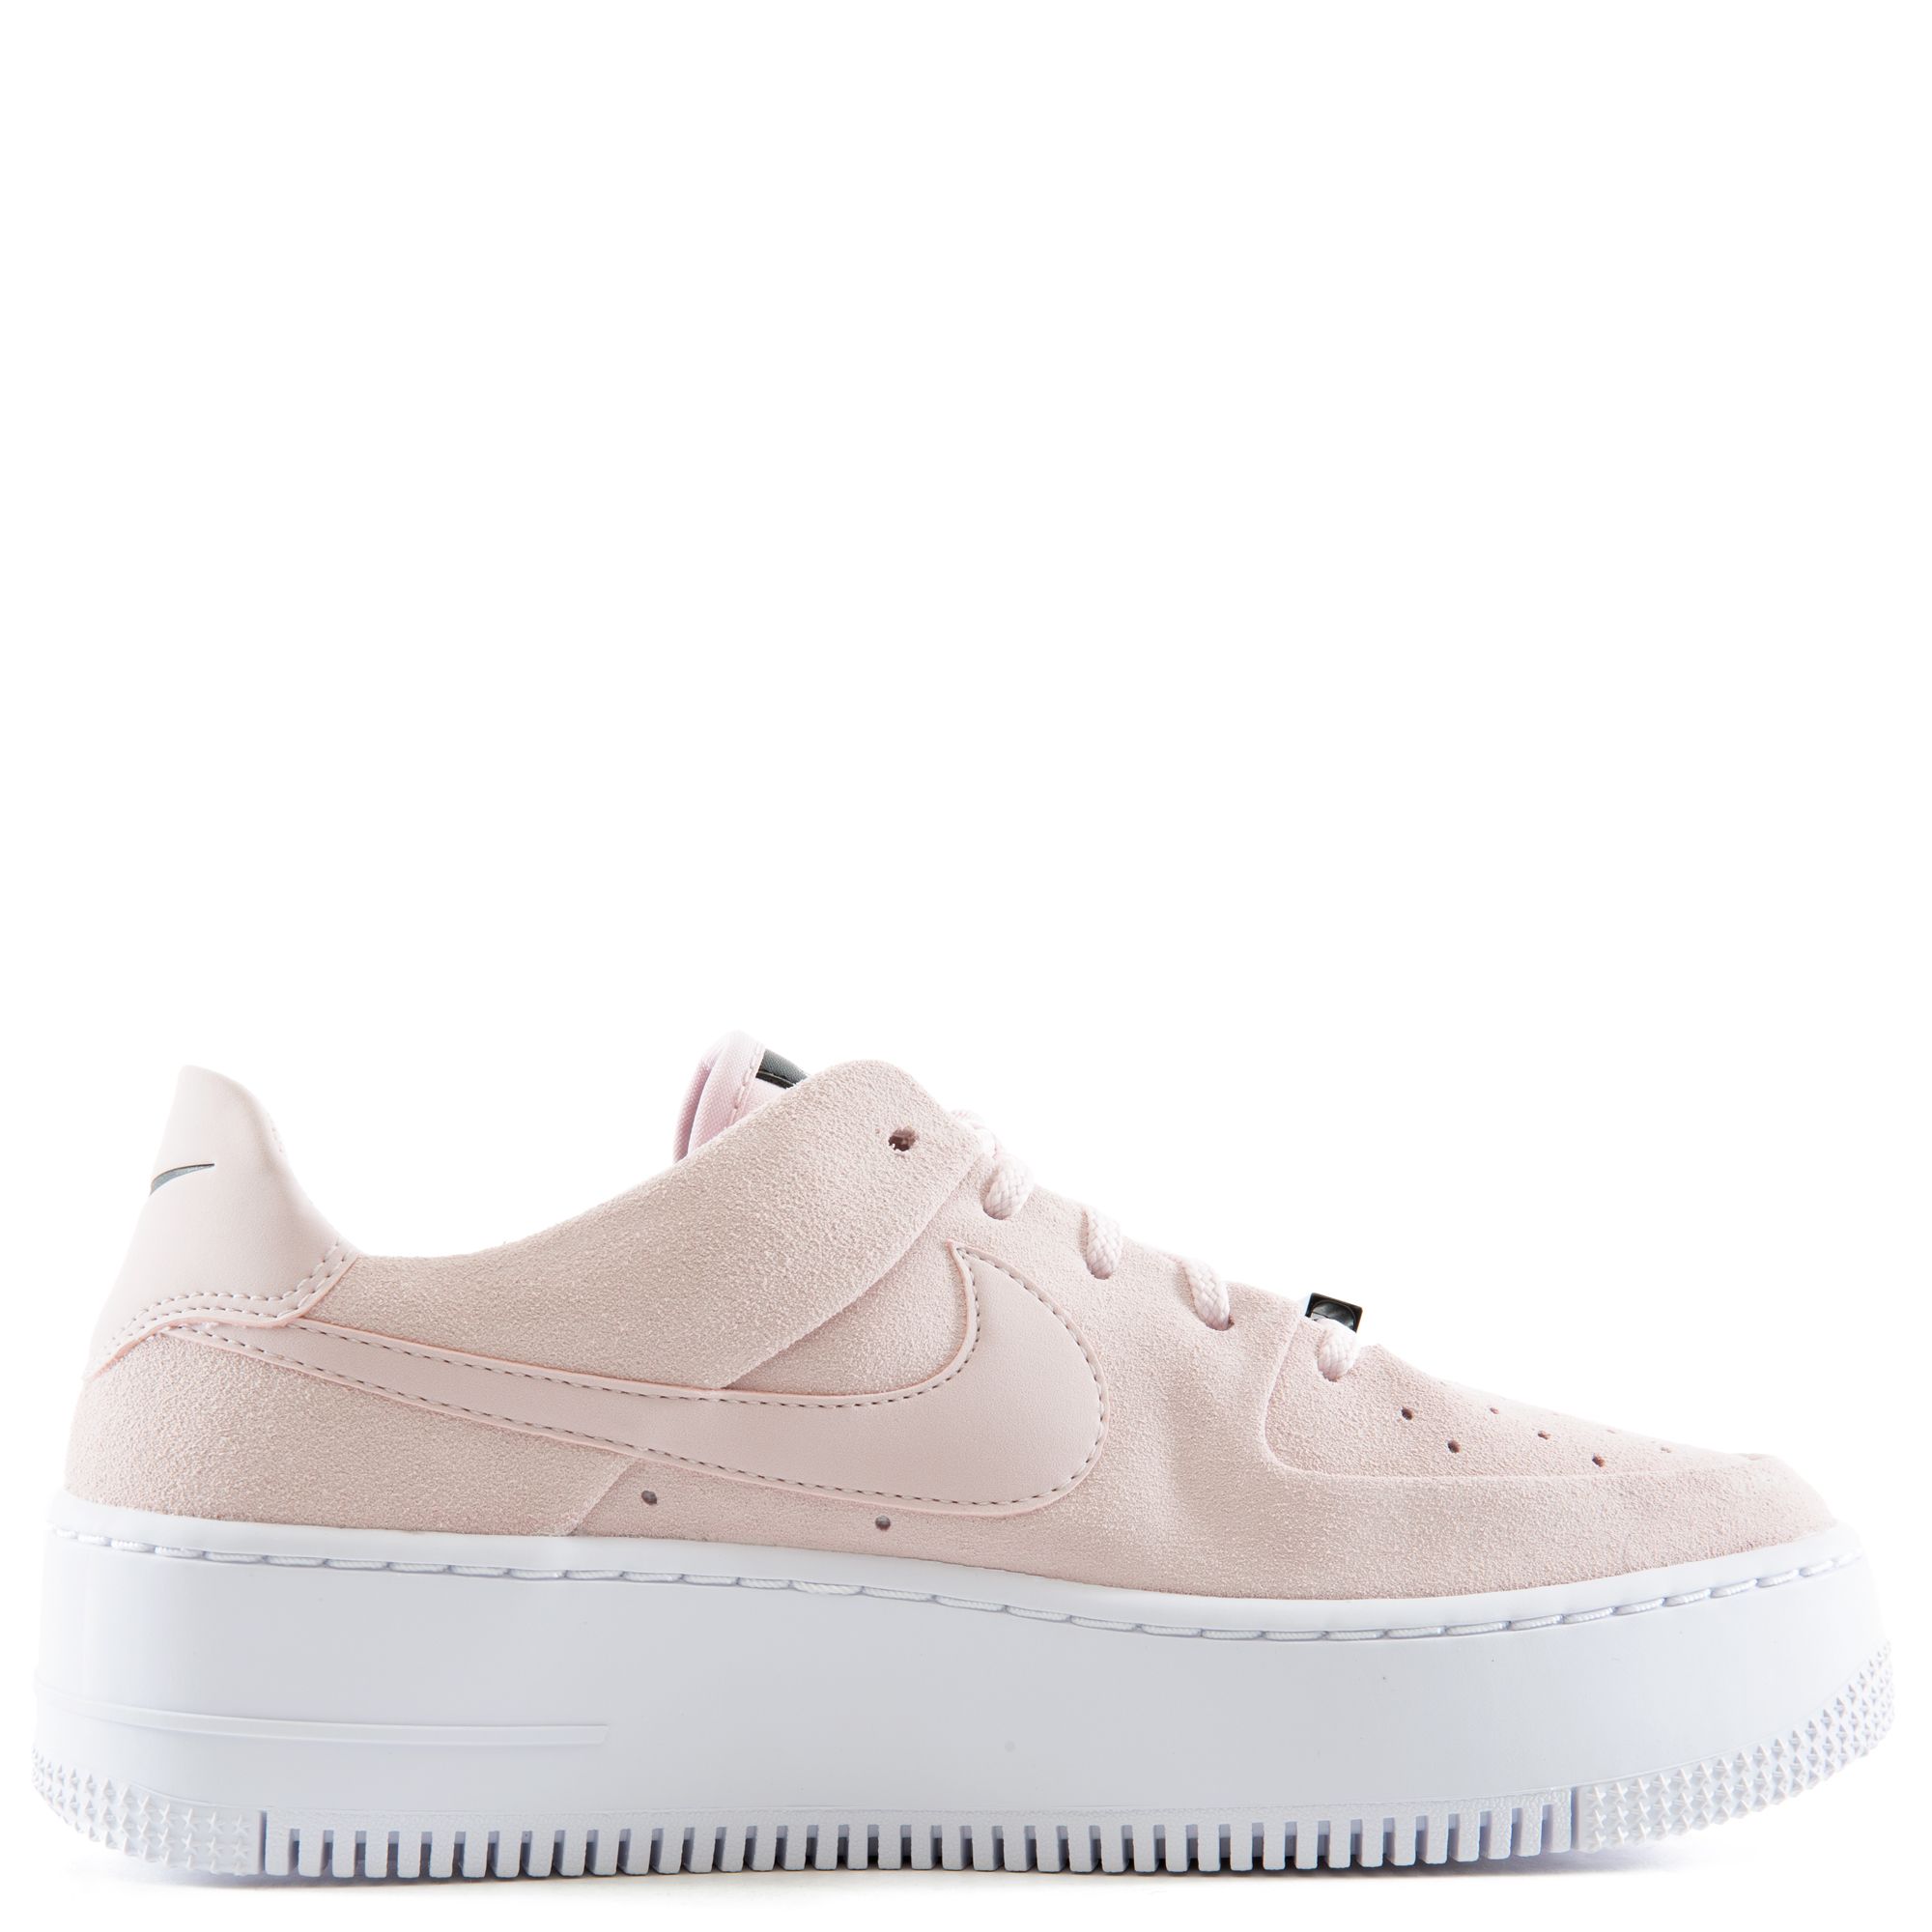 nike air force 1 sage low women's review